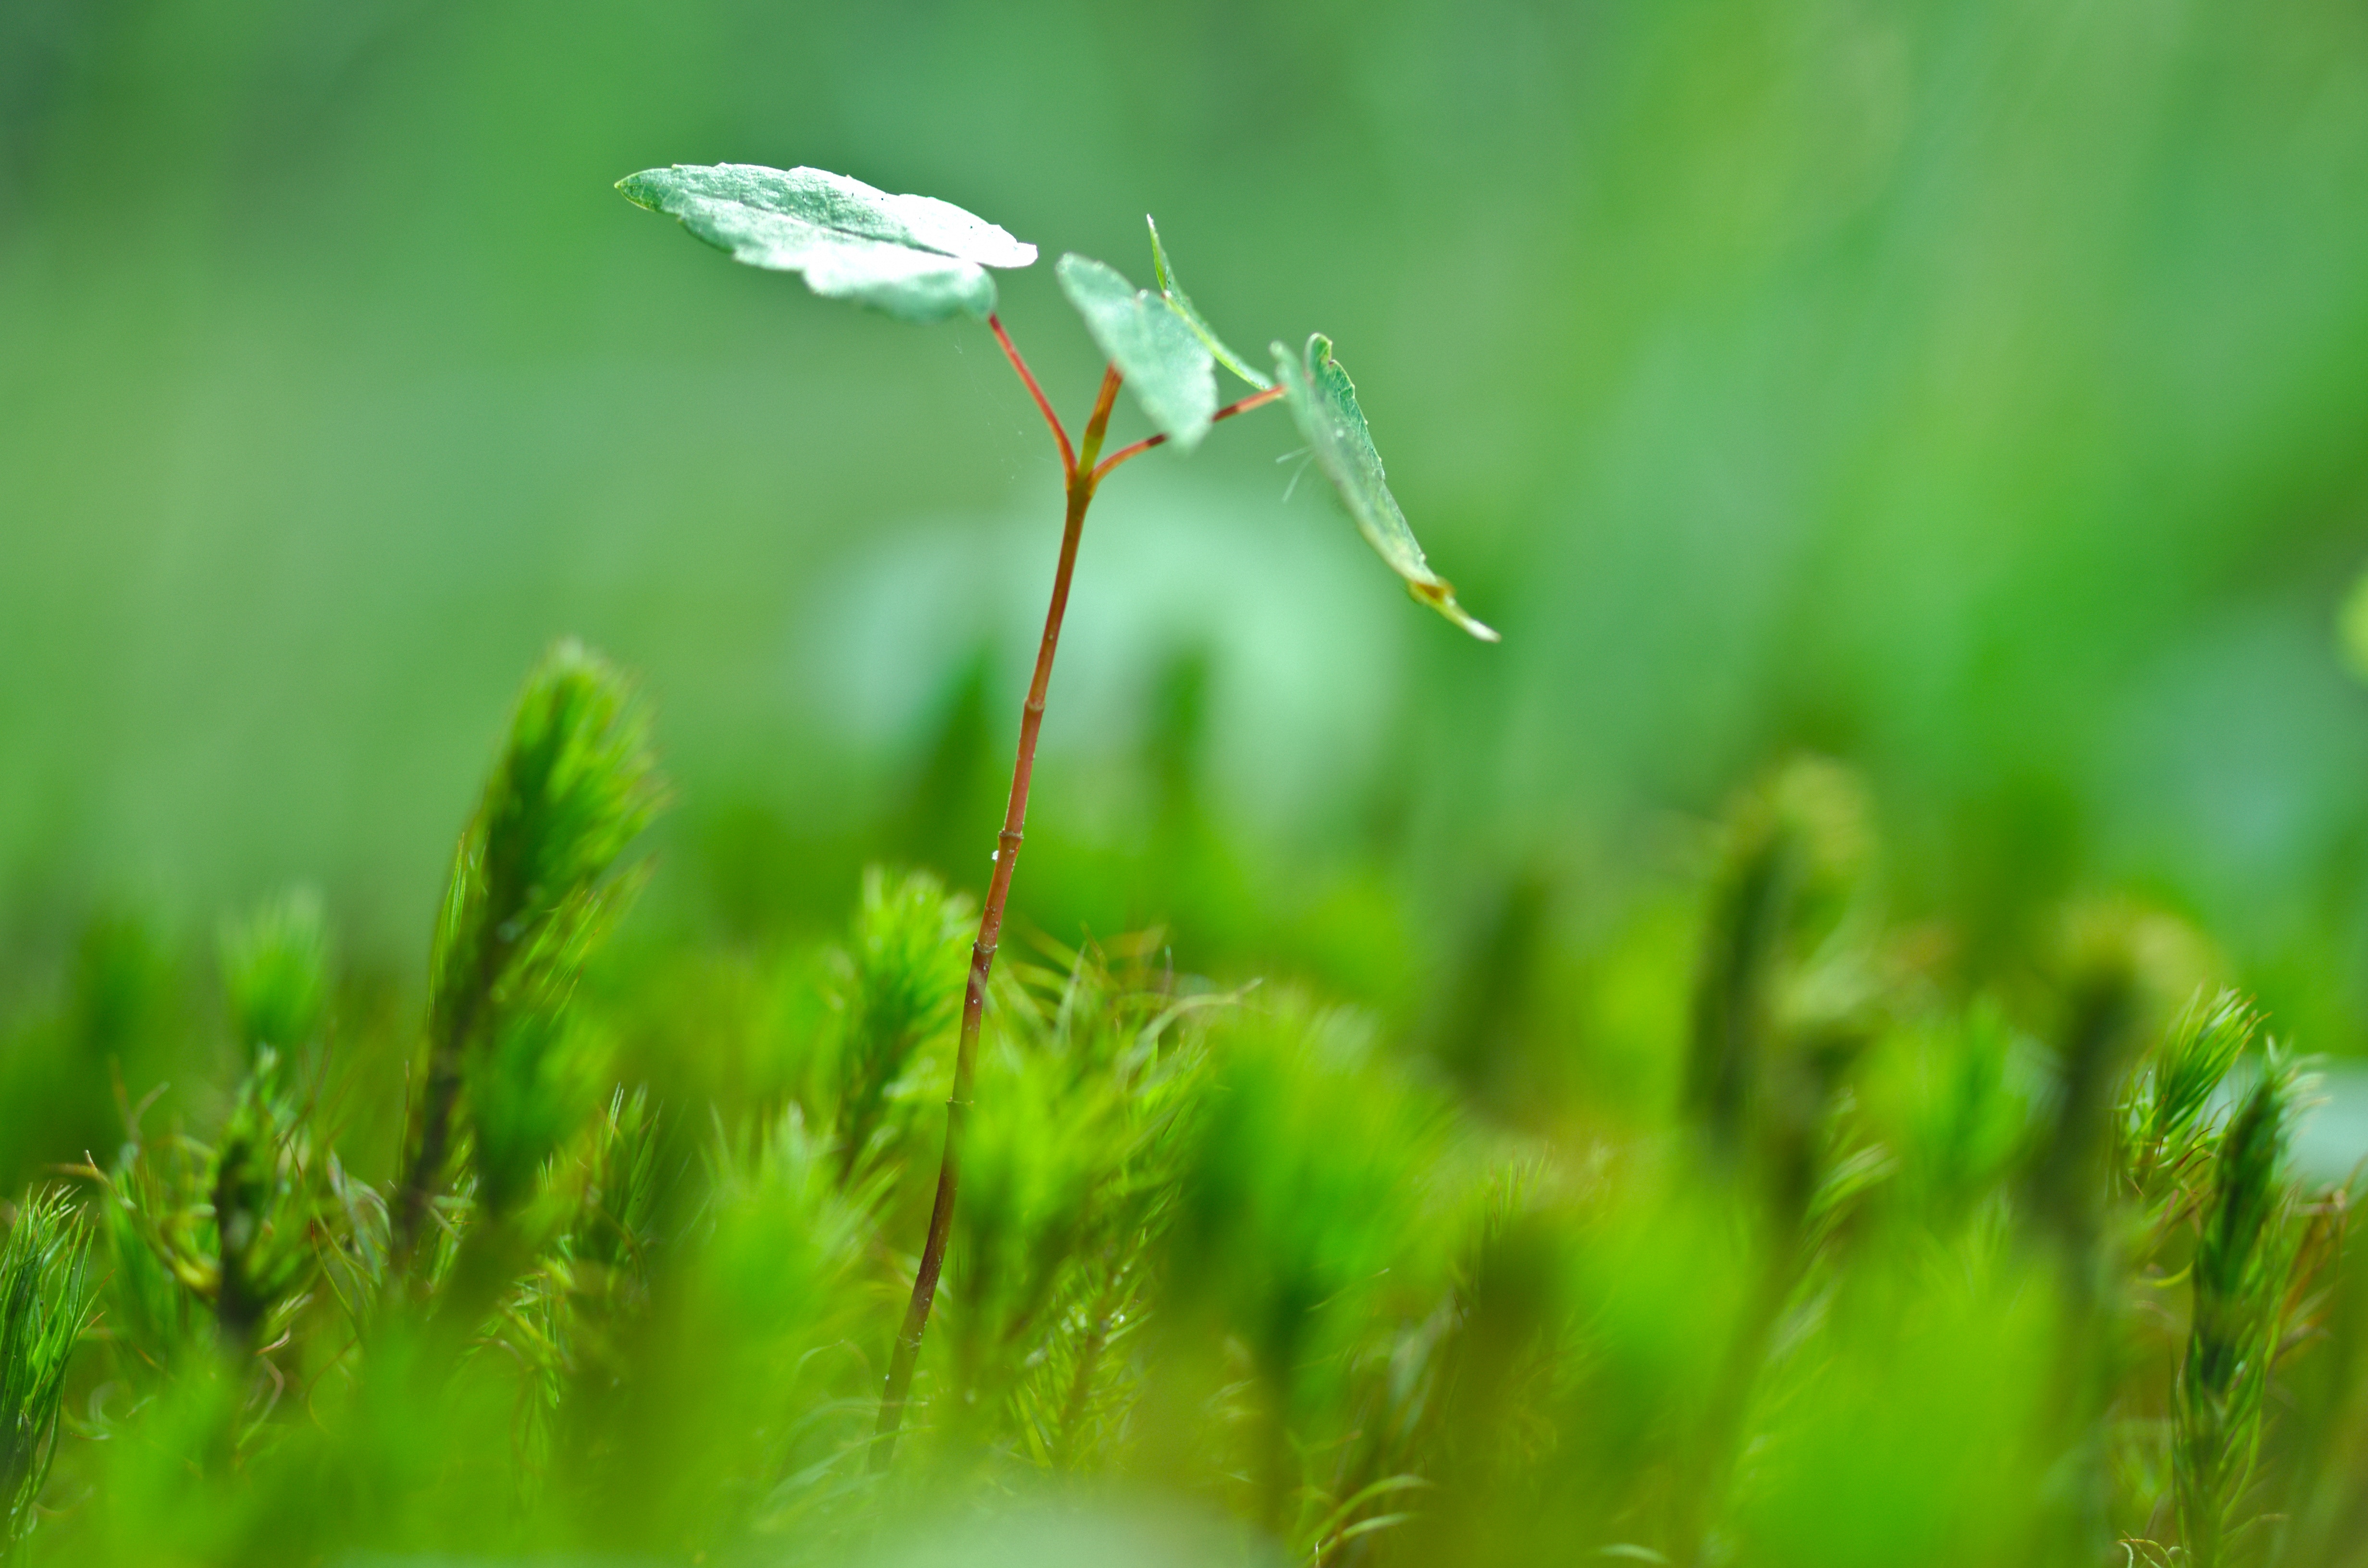 Selective focus photography on green leaf by Austin D on Unsplash